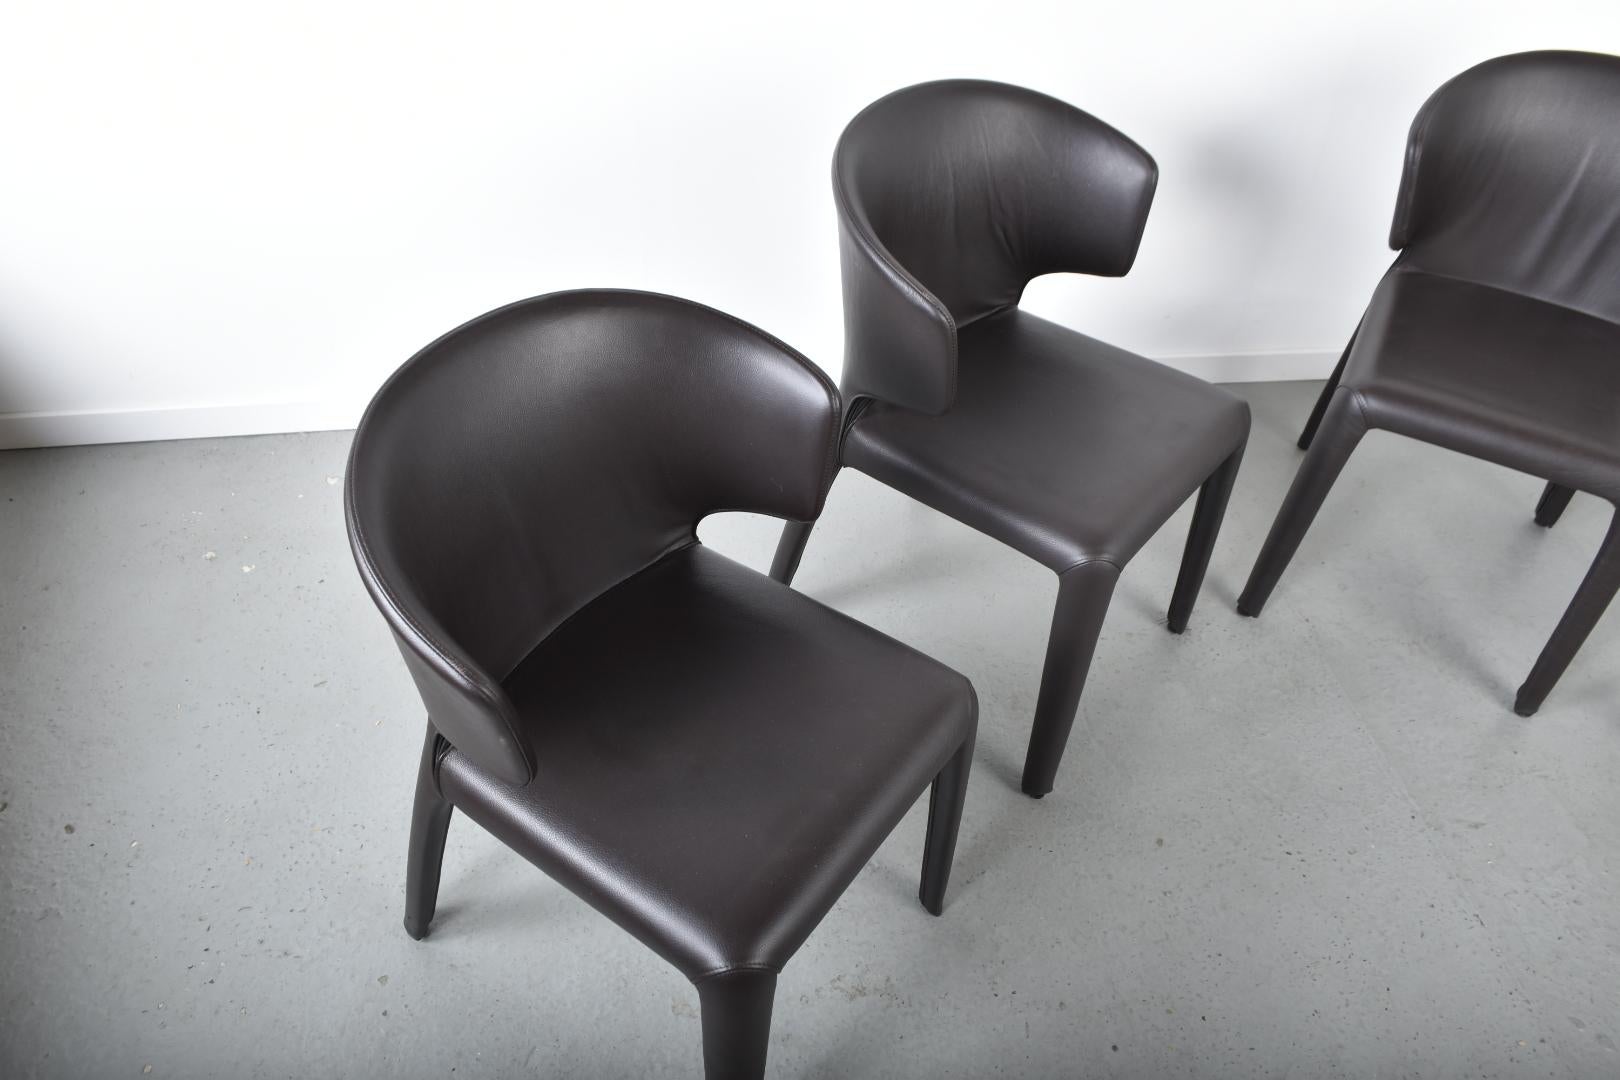 Set of 4 Hola 367 dining chairs by top Swiss designer Hannes Wettstein for Cassina.
